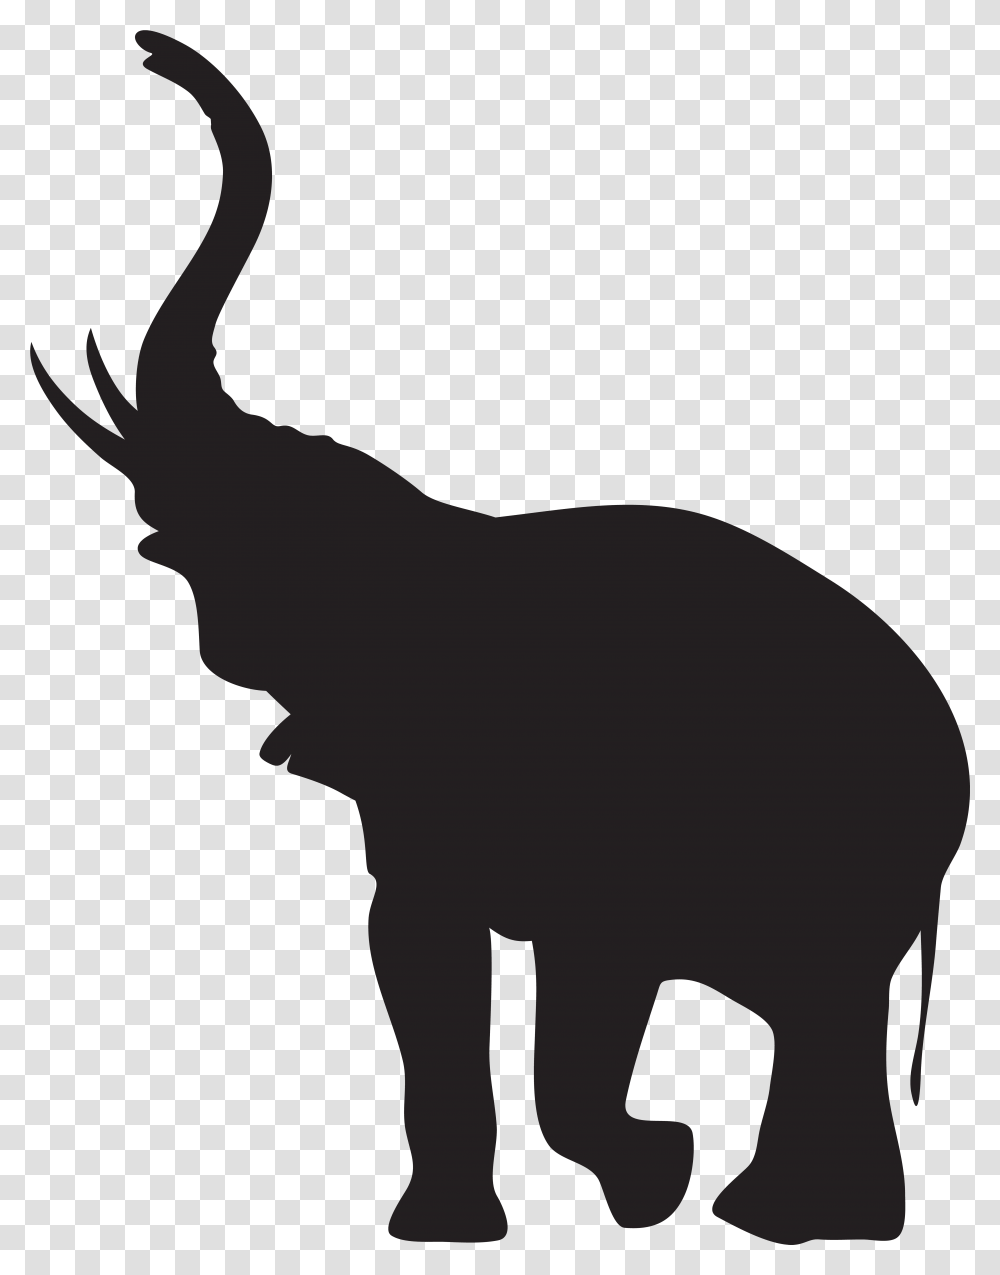 Elephant With Trunk Raised Silhouette Clip, Animal, Mammal, Dinosaur, Reptile Transparent Png